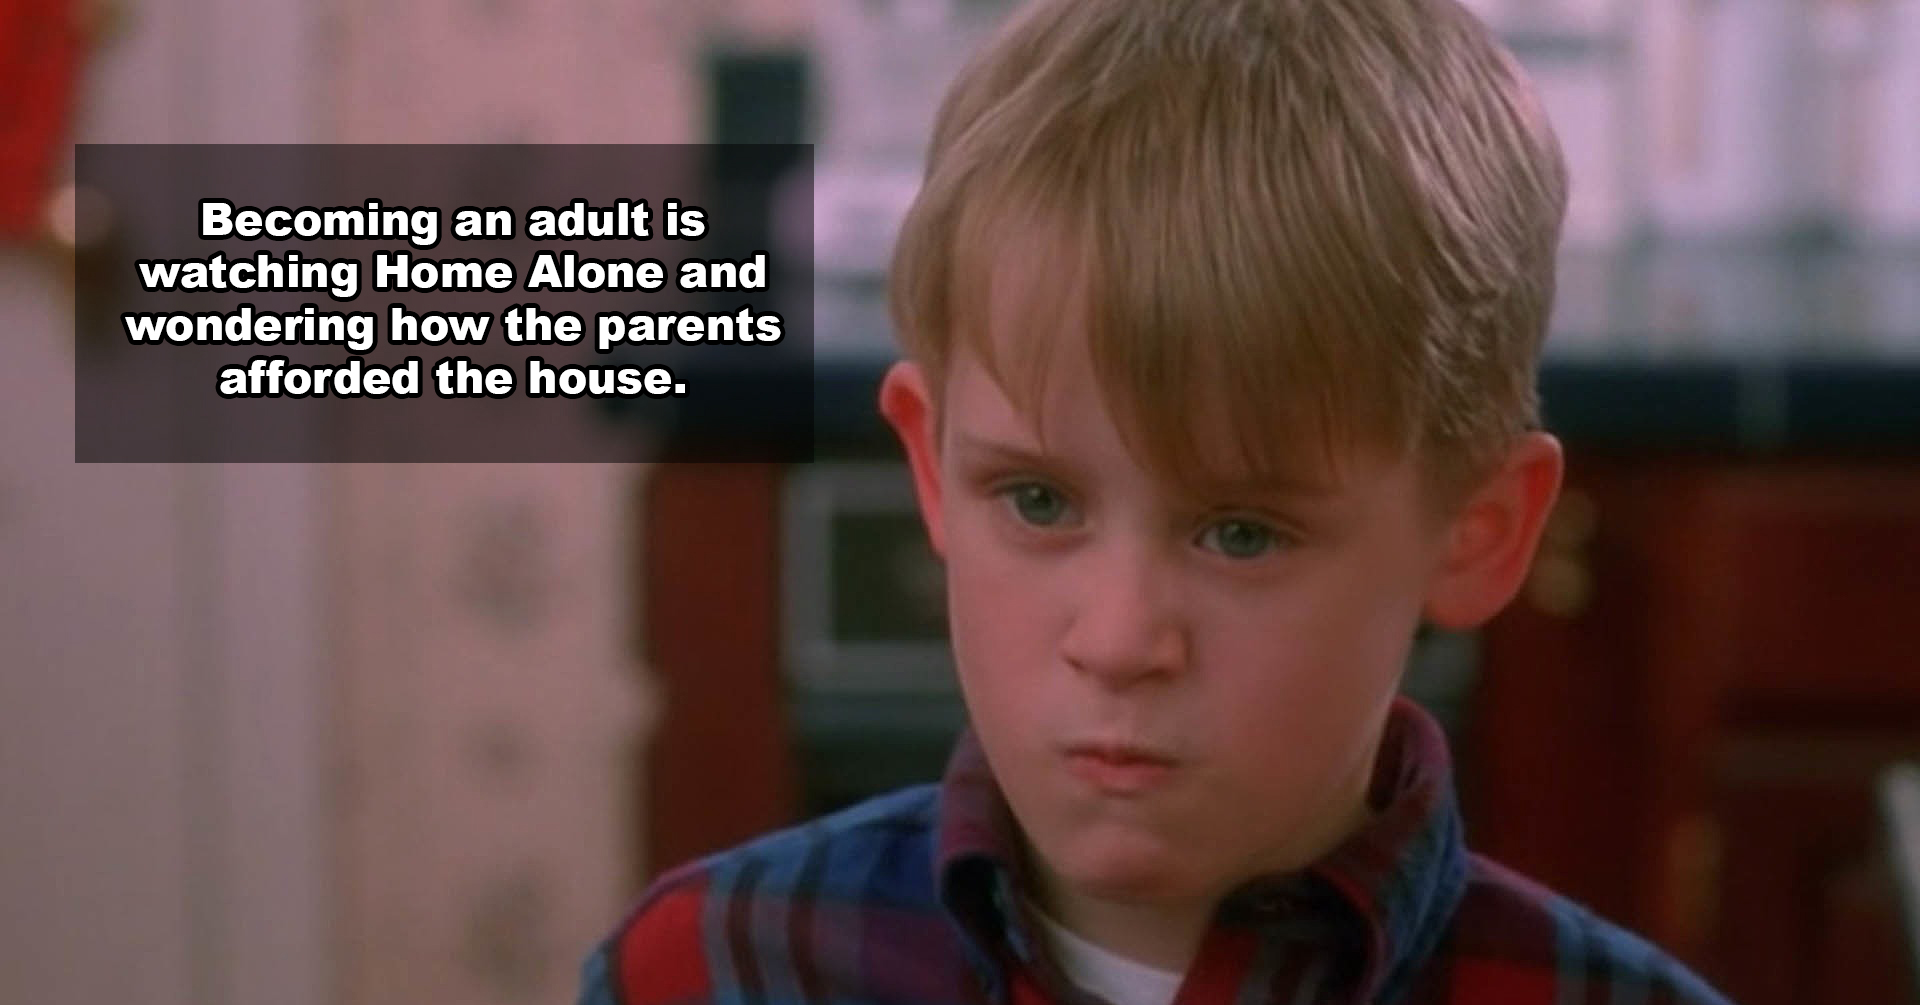 home alone kid - Becoming an adult is watching Home Alone and wondering how the parents afforded the house.